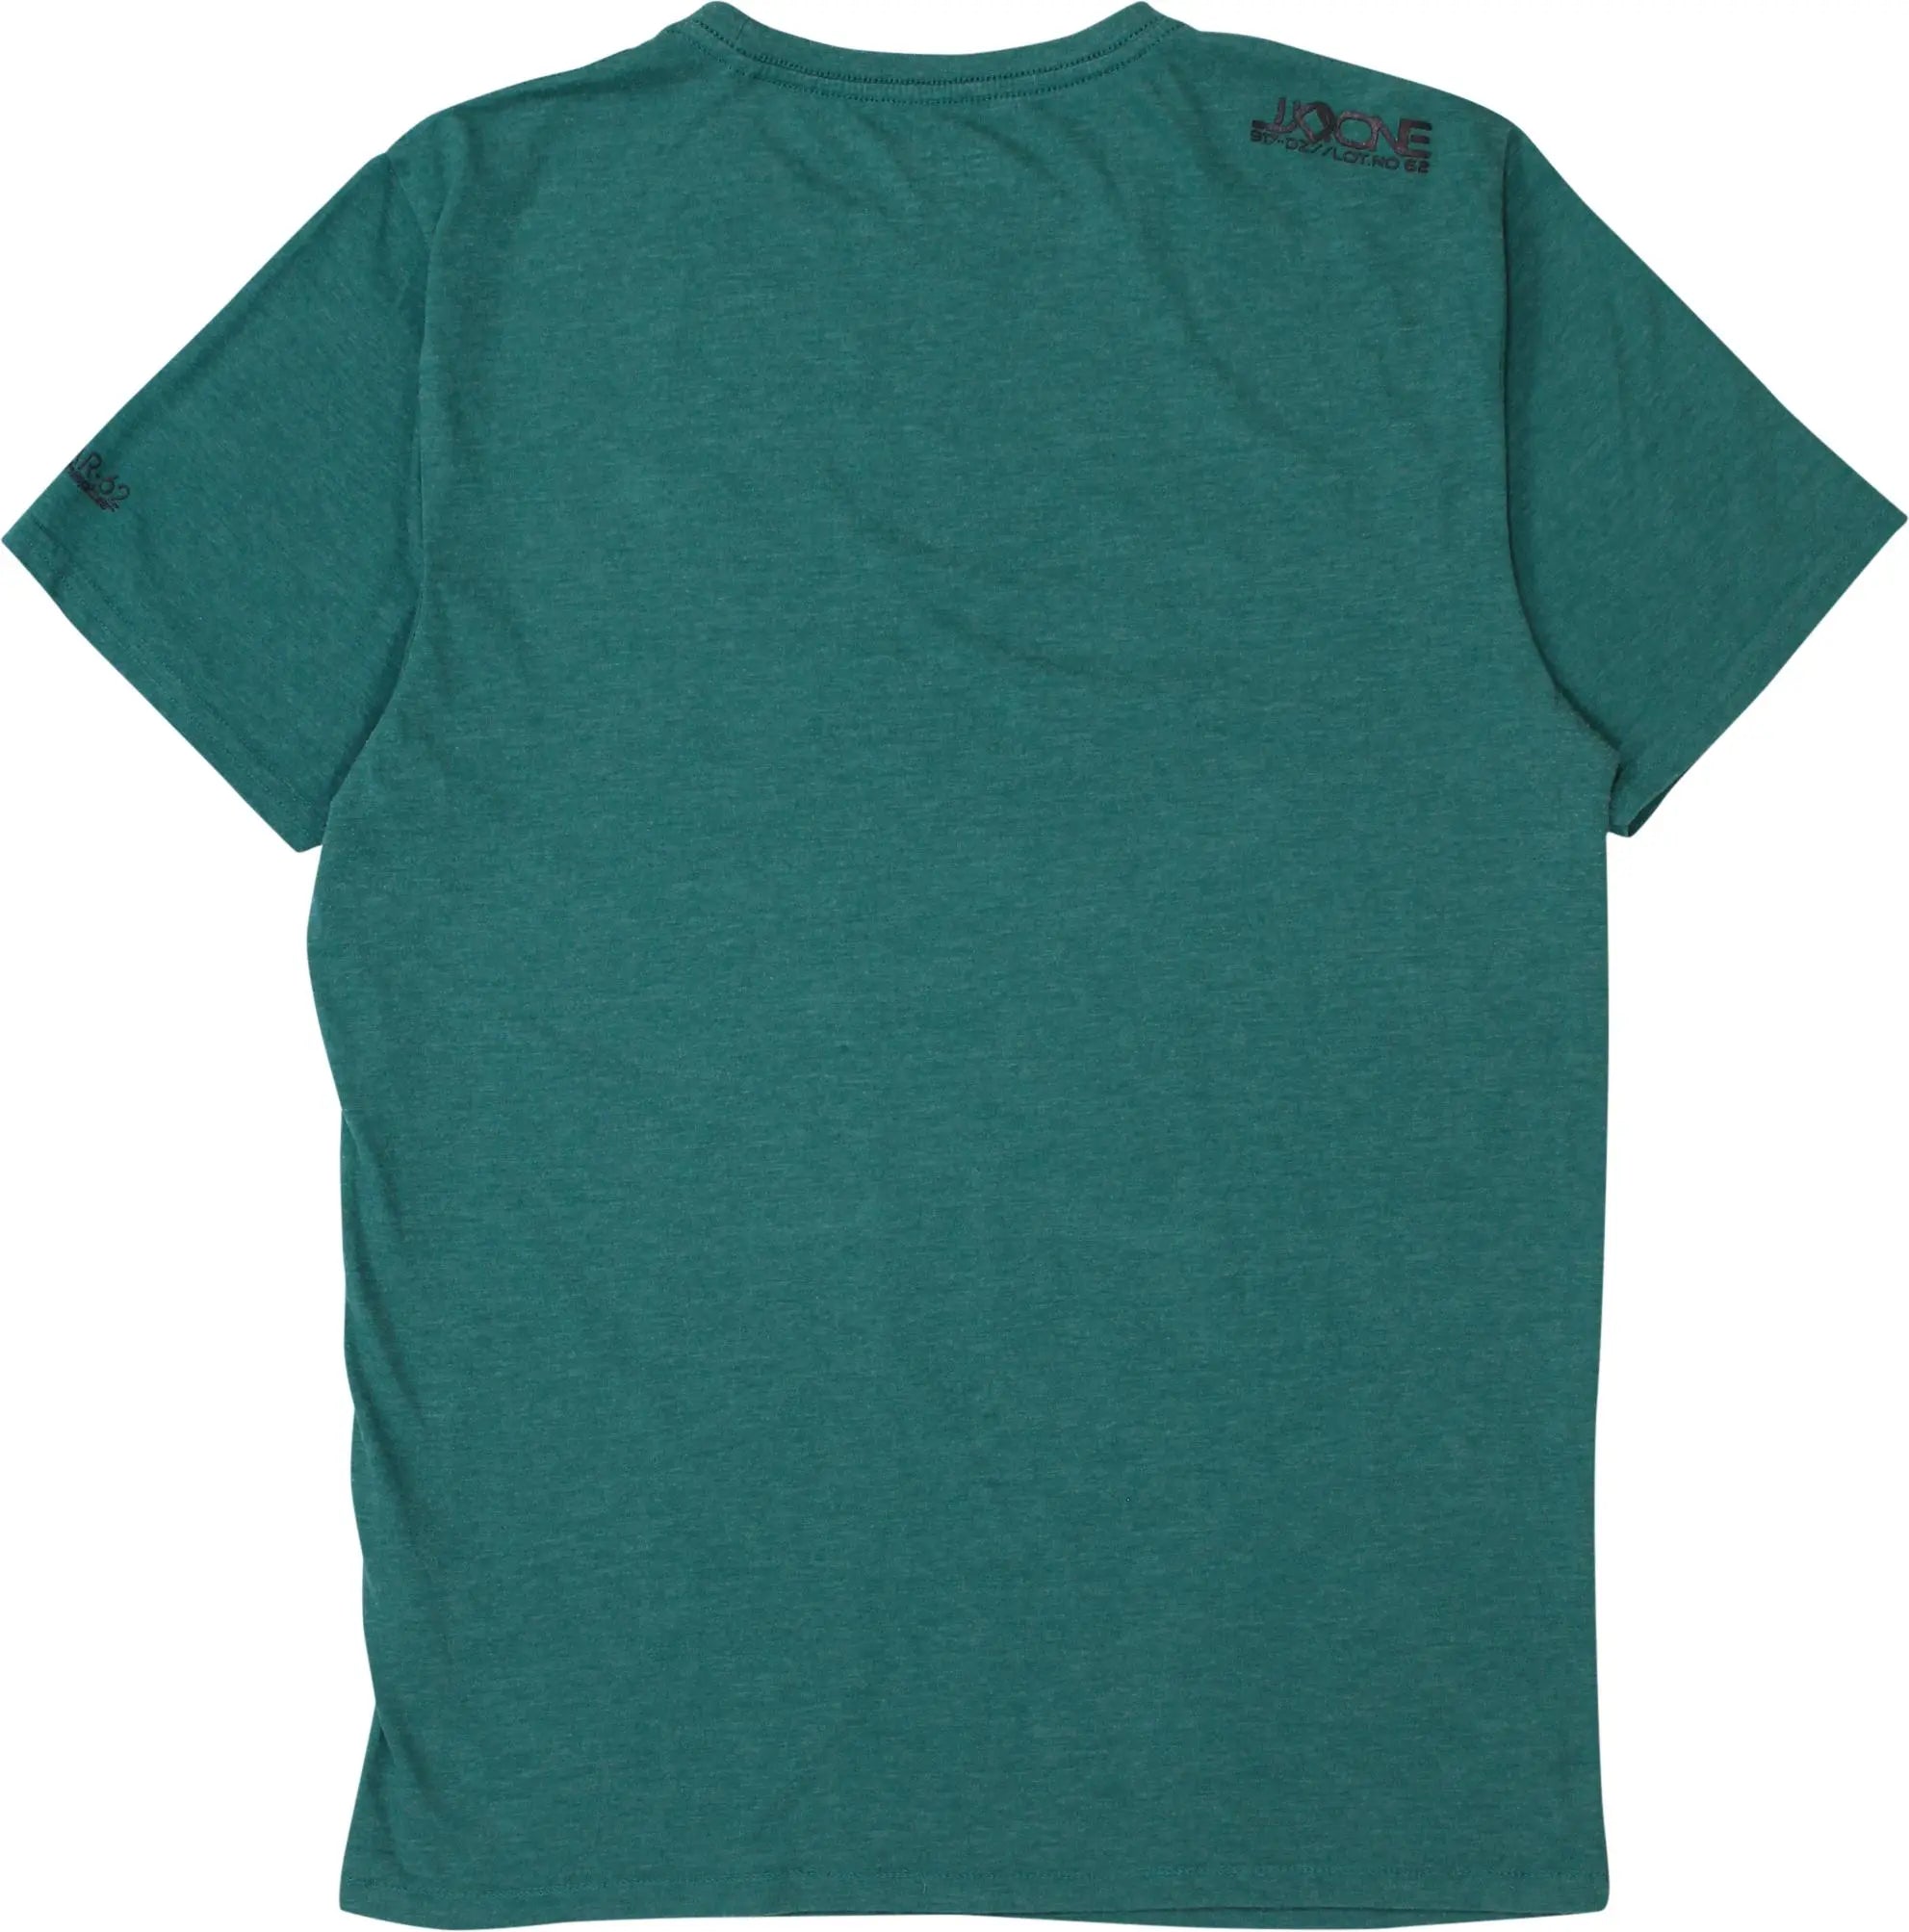 Unknown - Green T-shirt- ThriftTale.com - Vintage and second handclothing